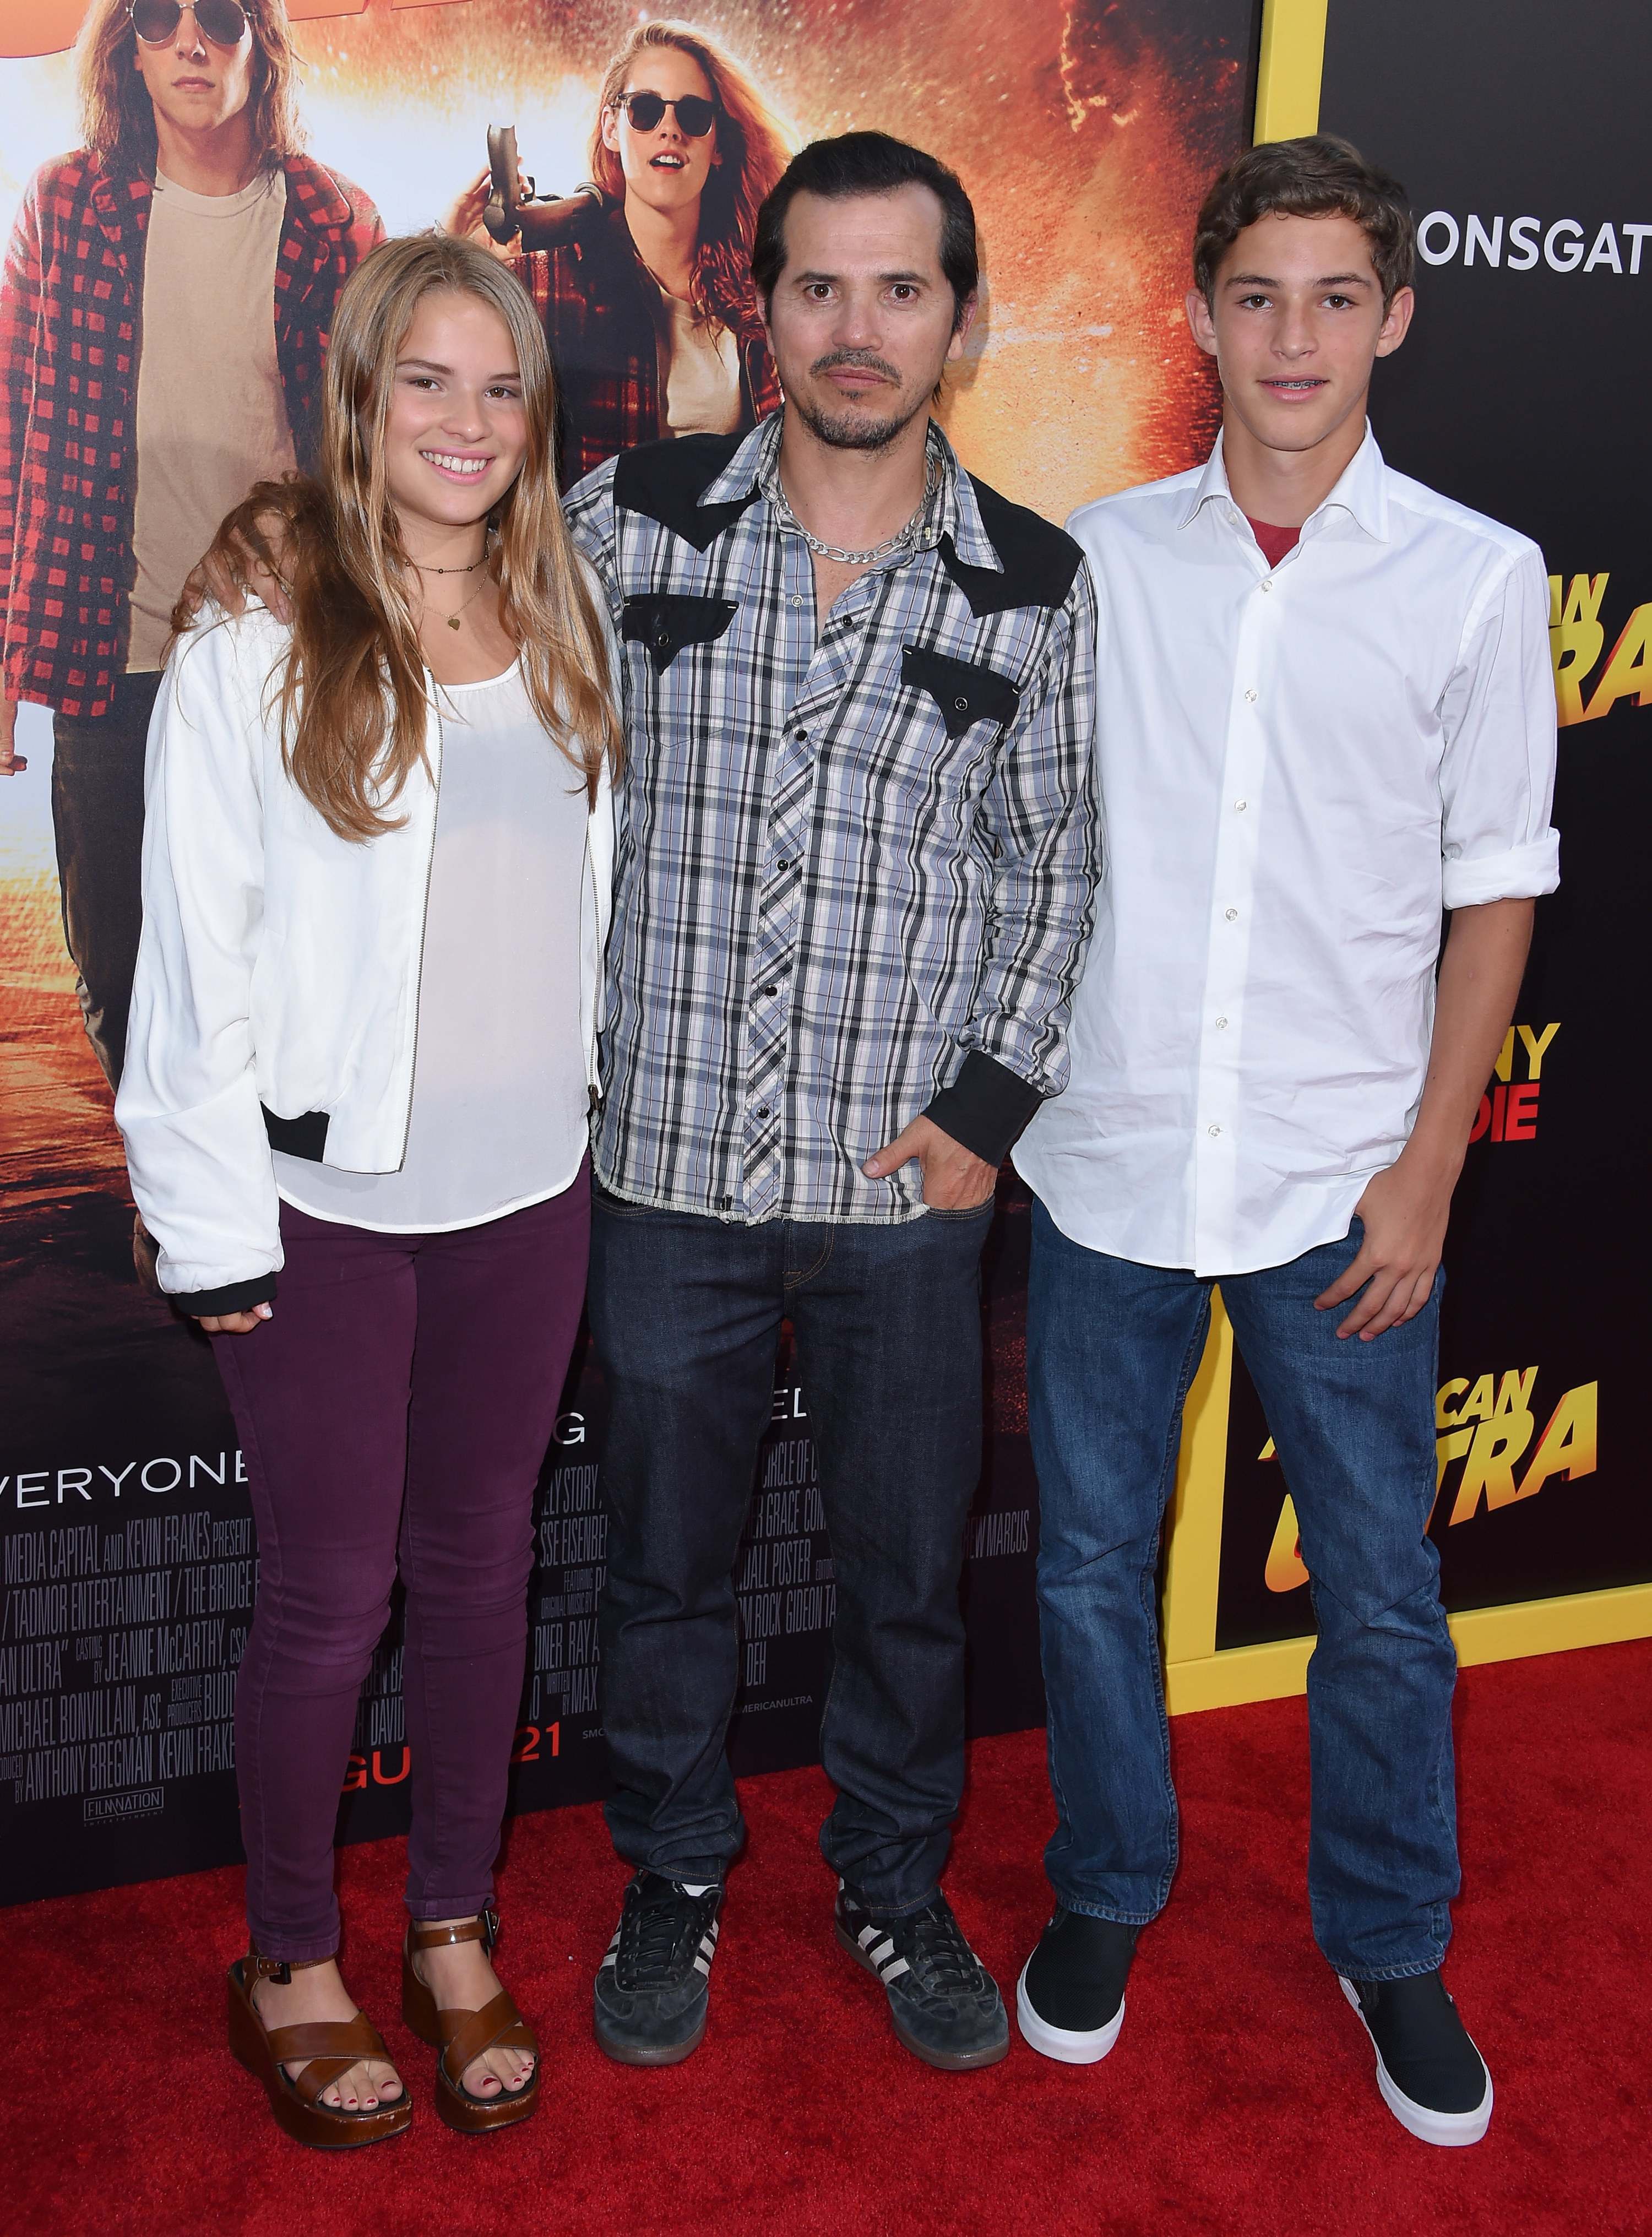 John Leguizamo posing on a red carpet with his son and daughter